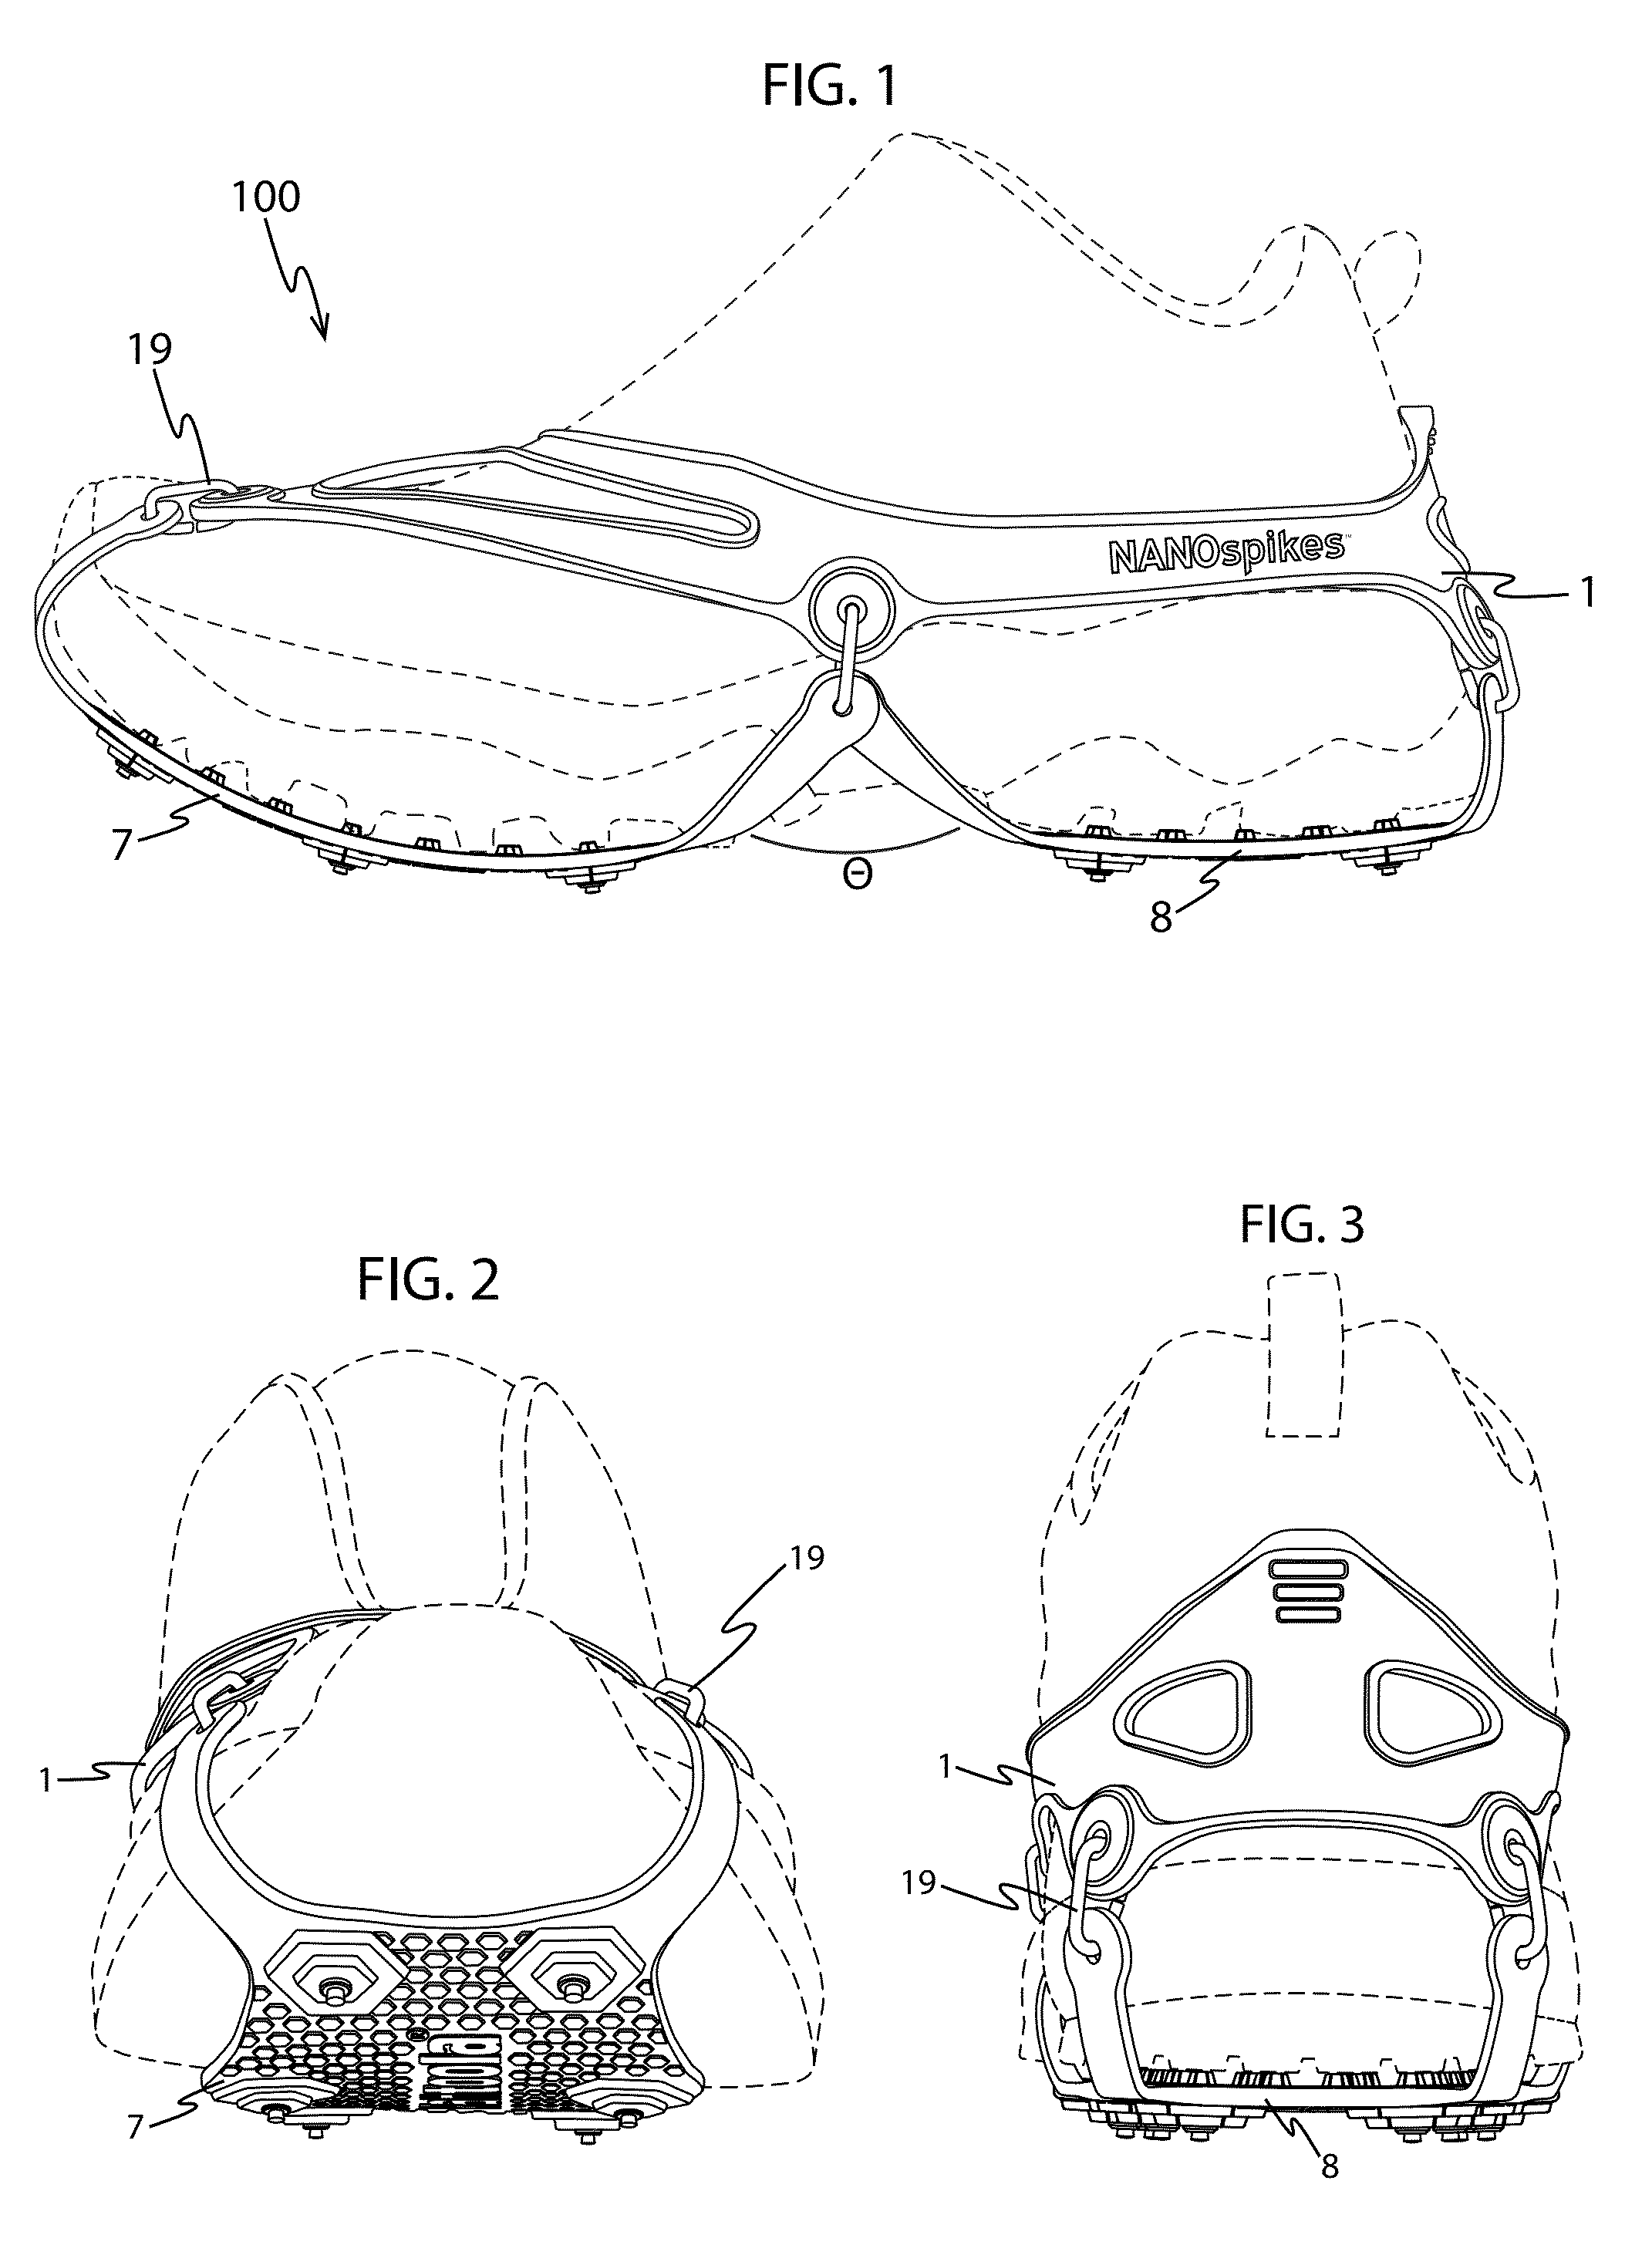 Footwear traction devices and systems and mechanisms for making durable connections to soft body materials